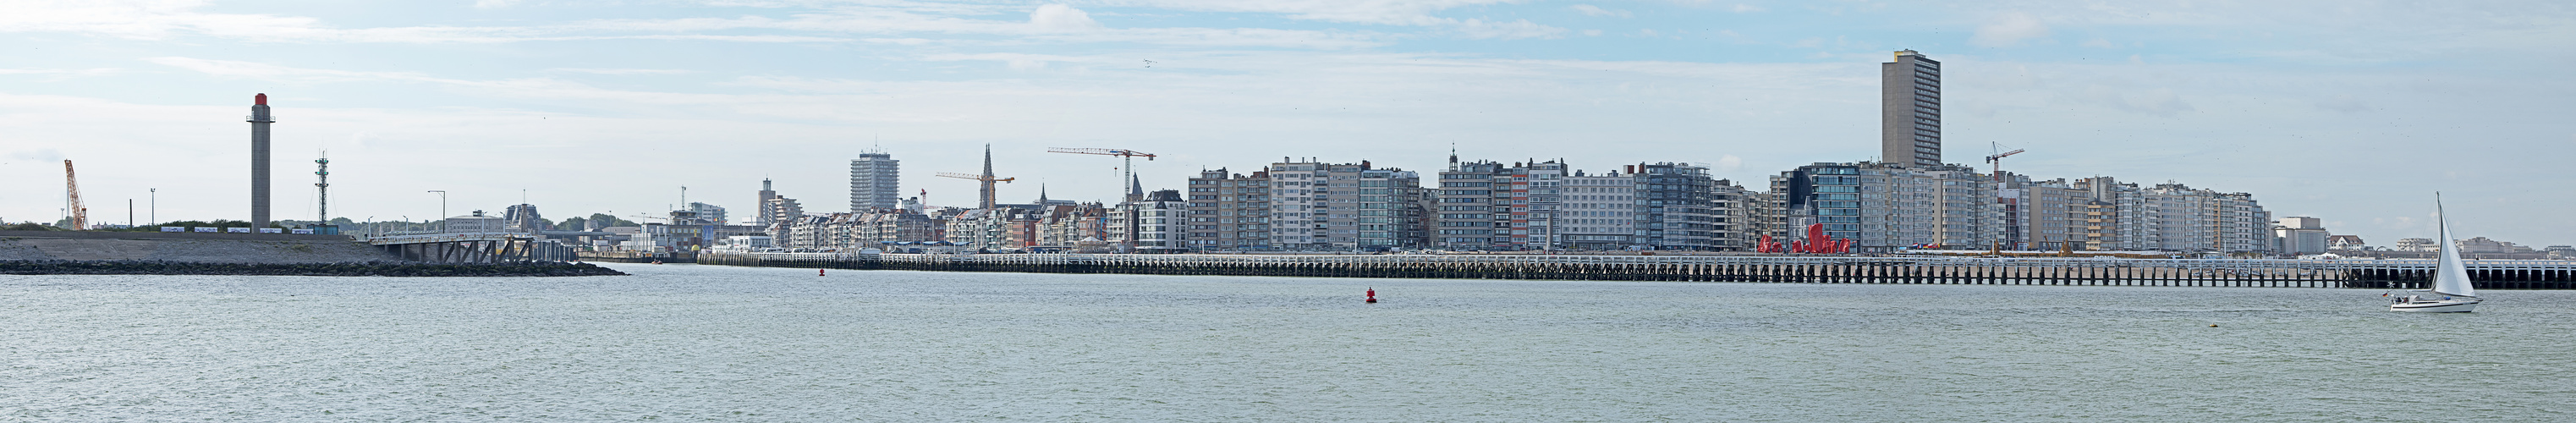 Panorama Oostende